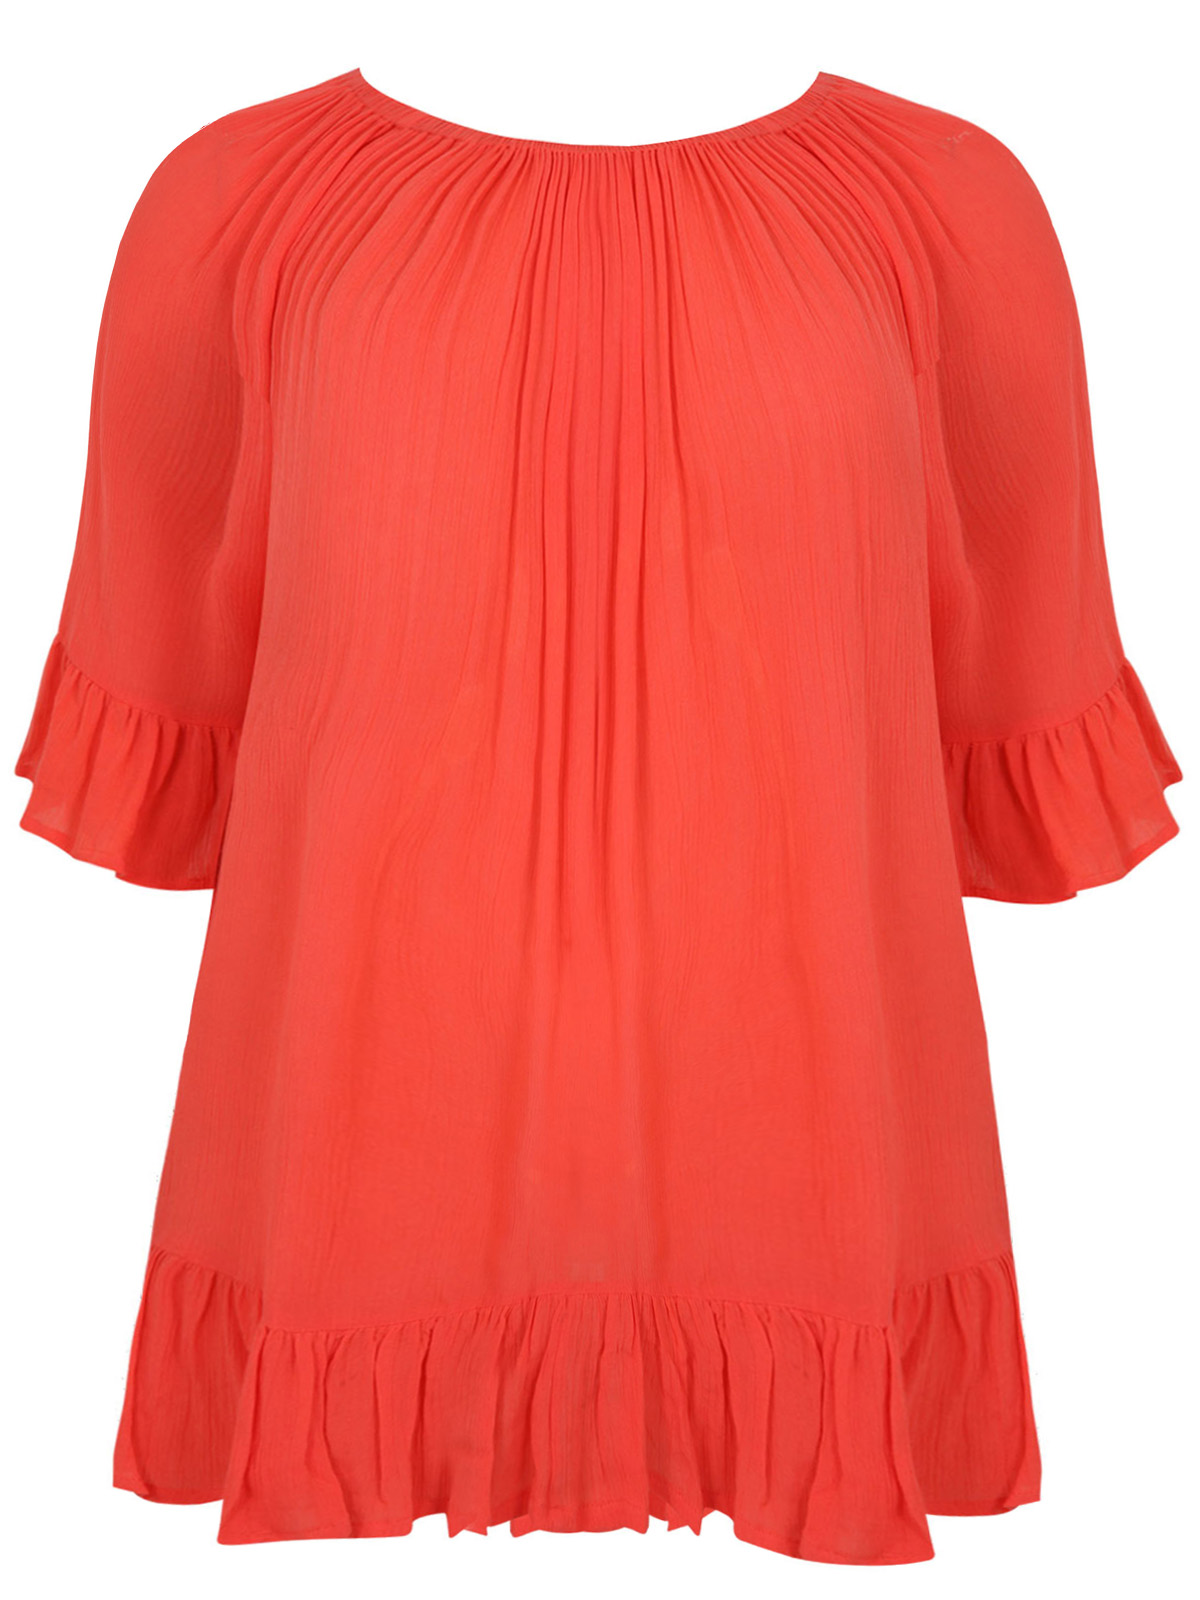 CURVE - - Yours ORANGE Crinkle Bardot Gypsy Top - Plus Size 22 to 30/32